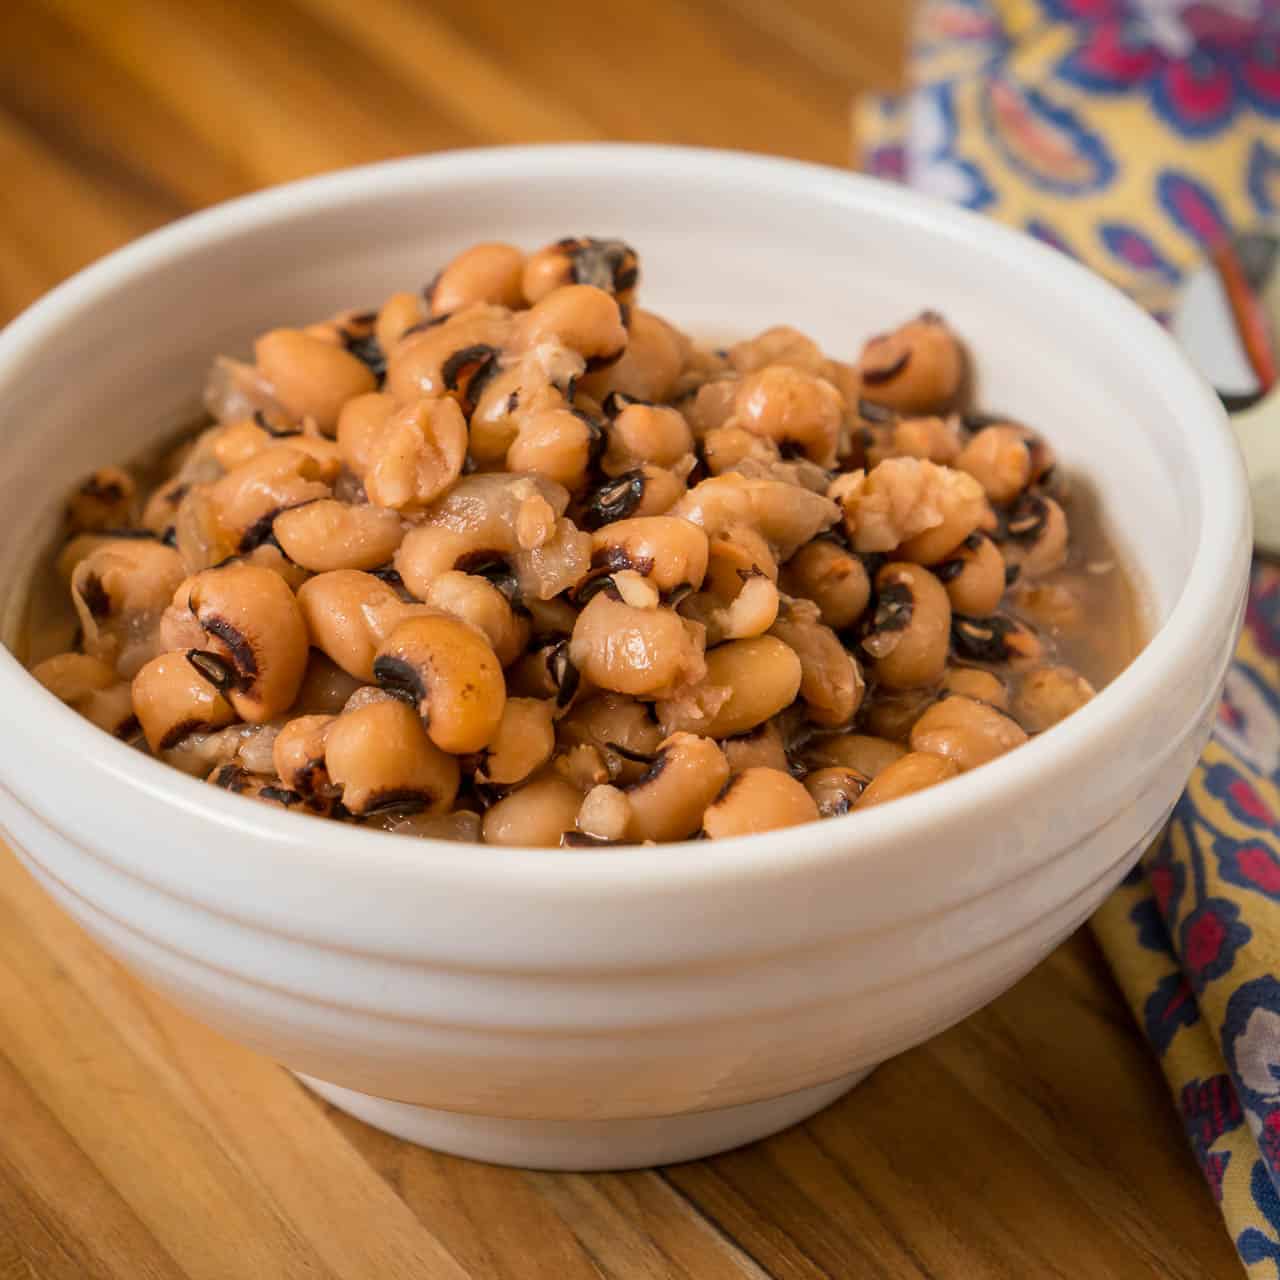 A bowl of cooked black eyed peas on a wooden tabletop